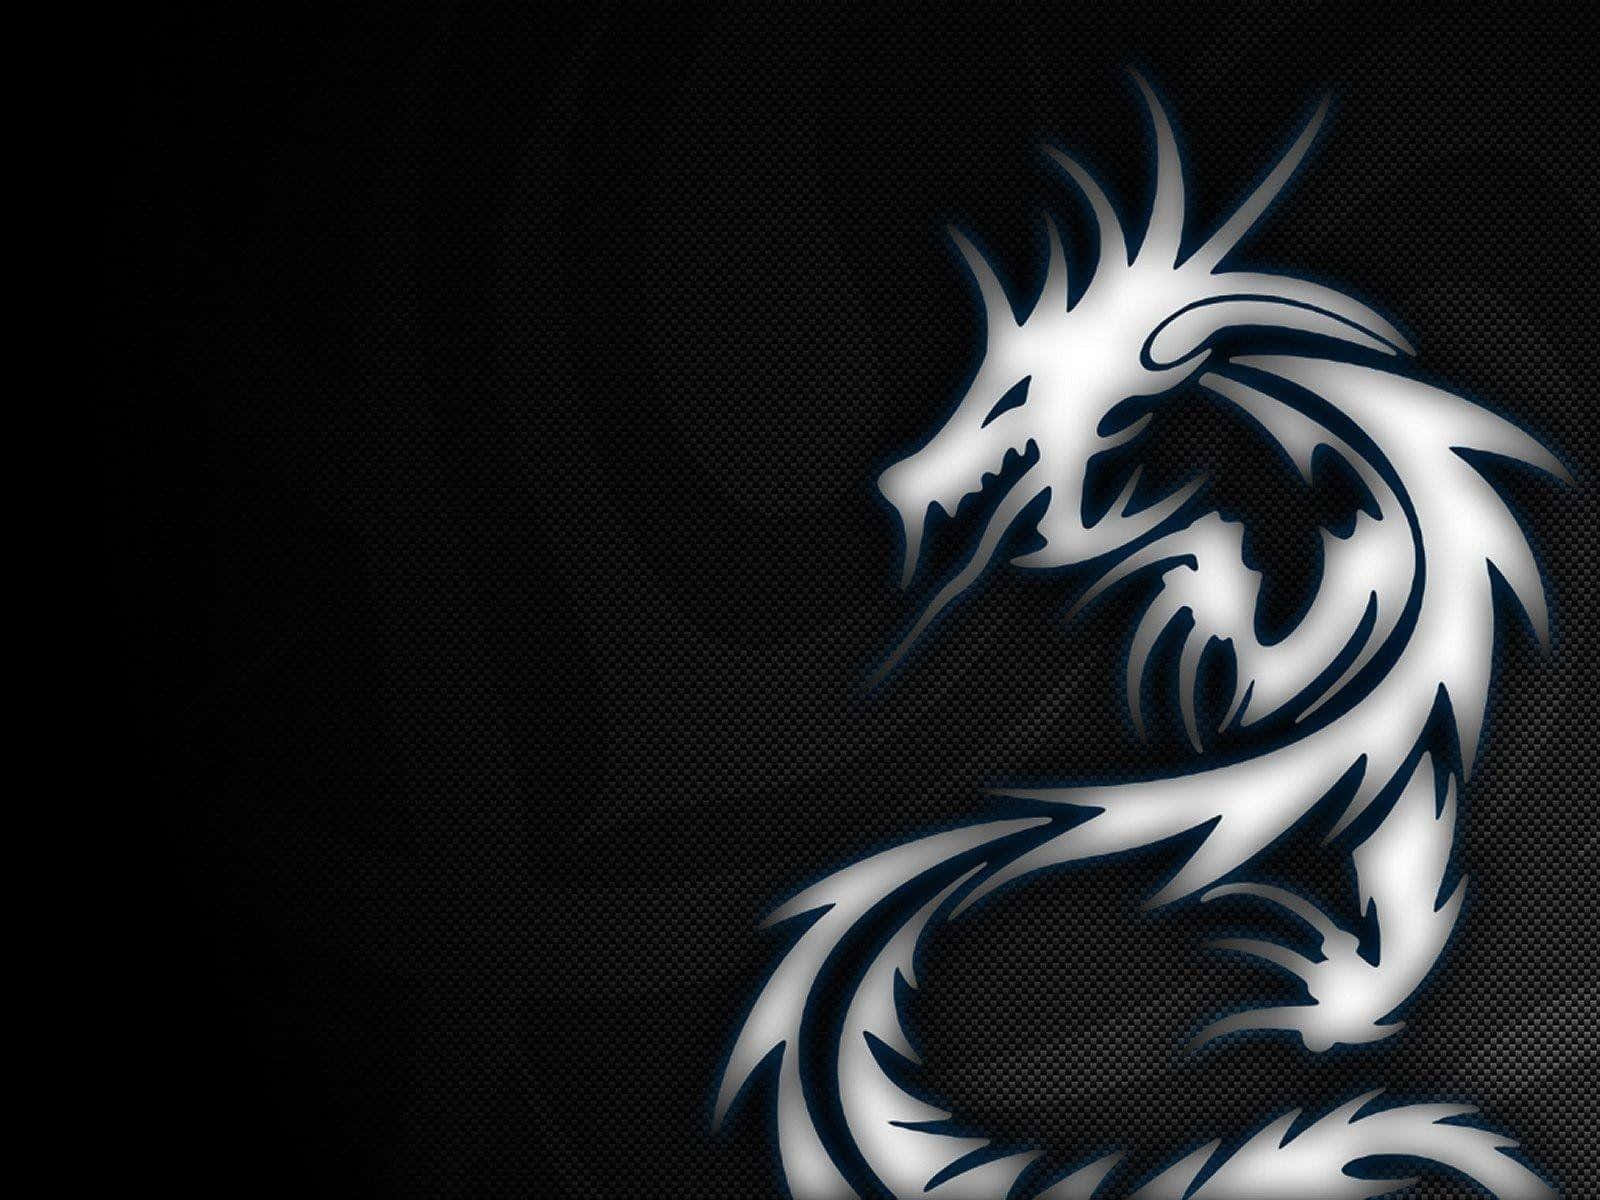 Black Dragon With Spikes Wallpaper